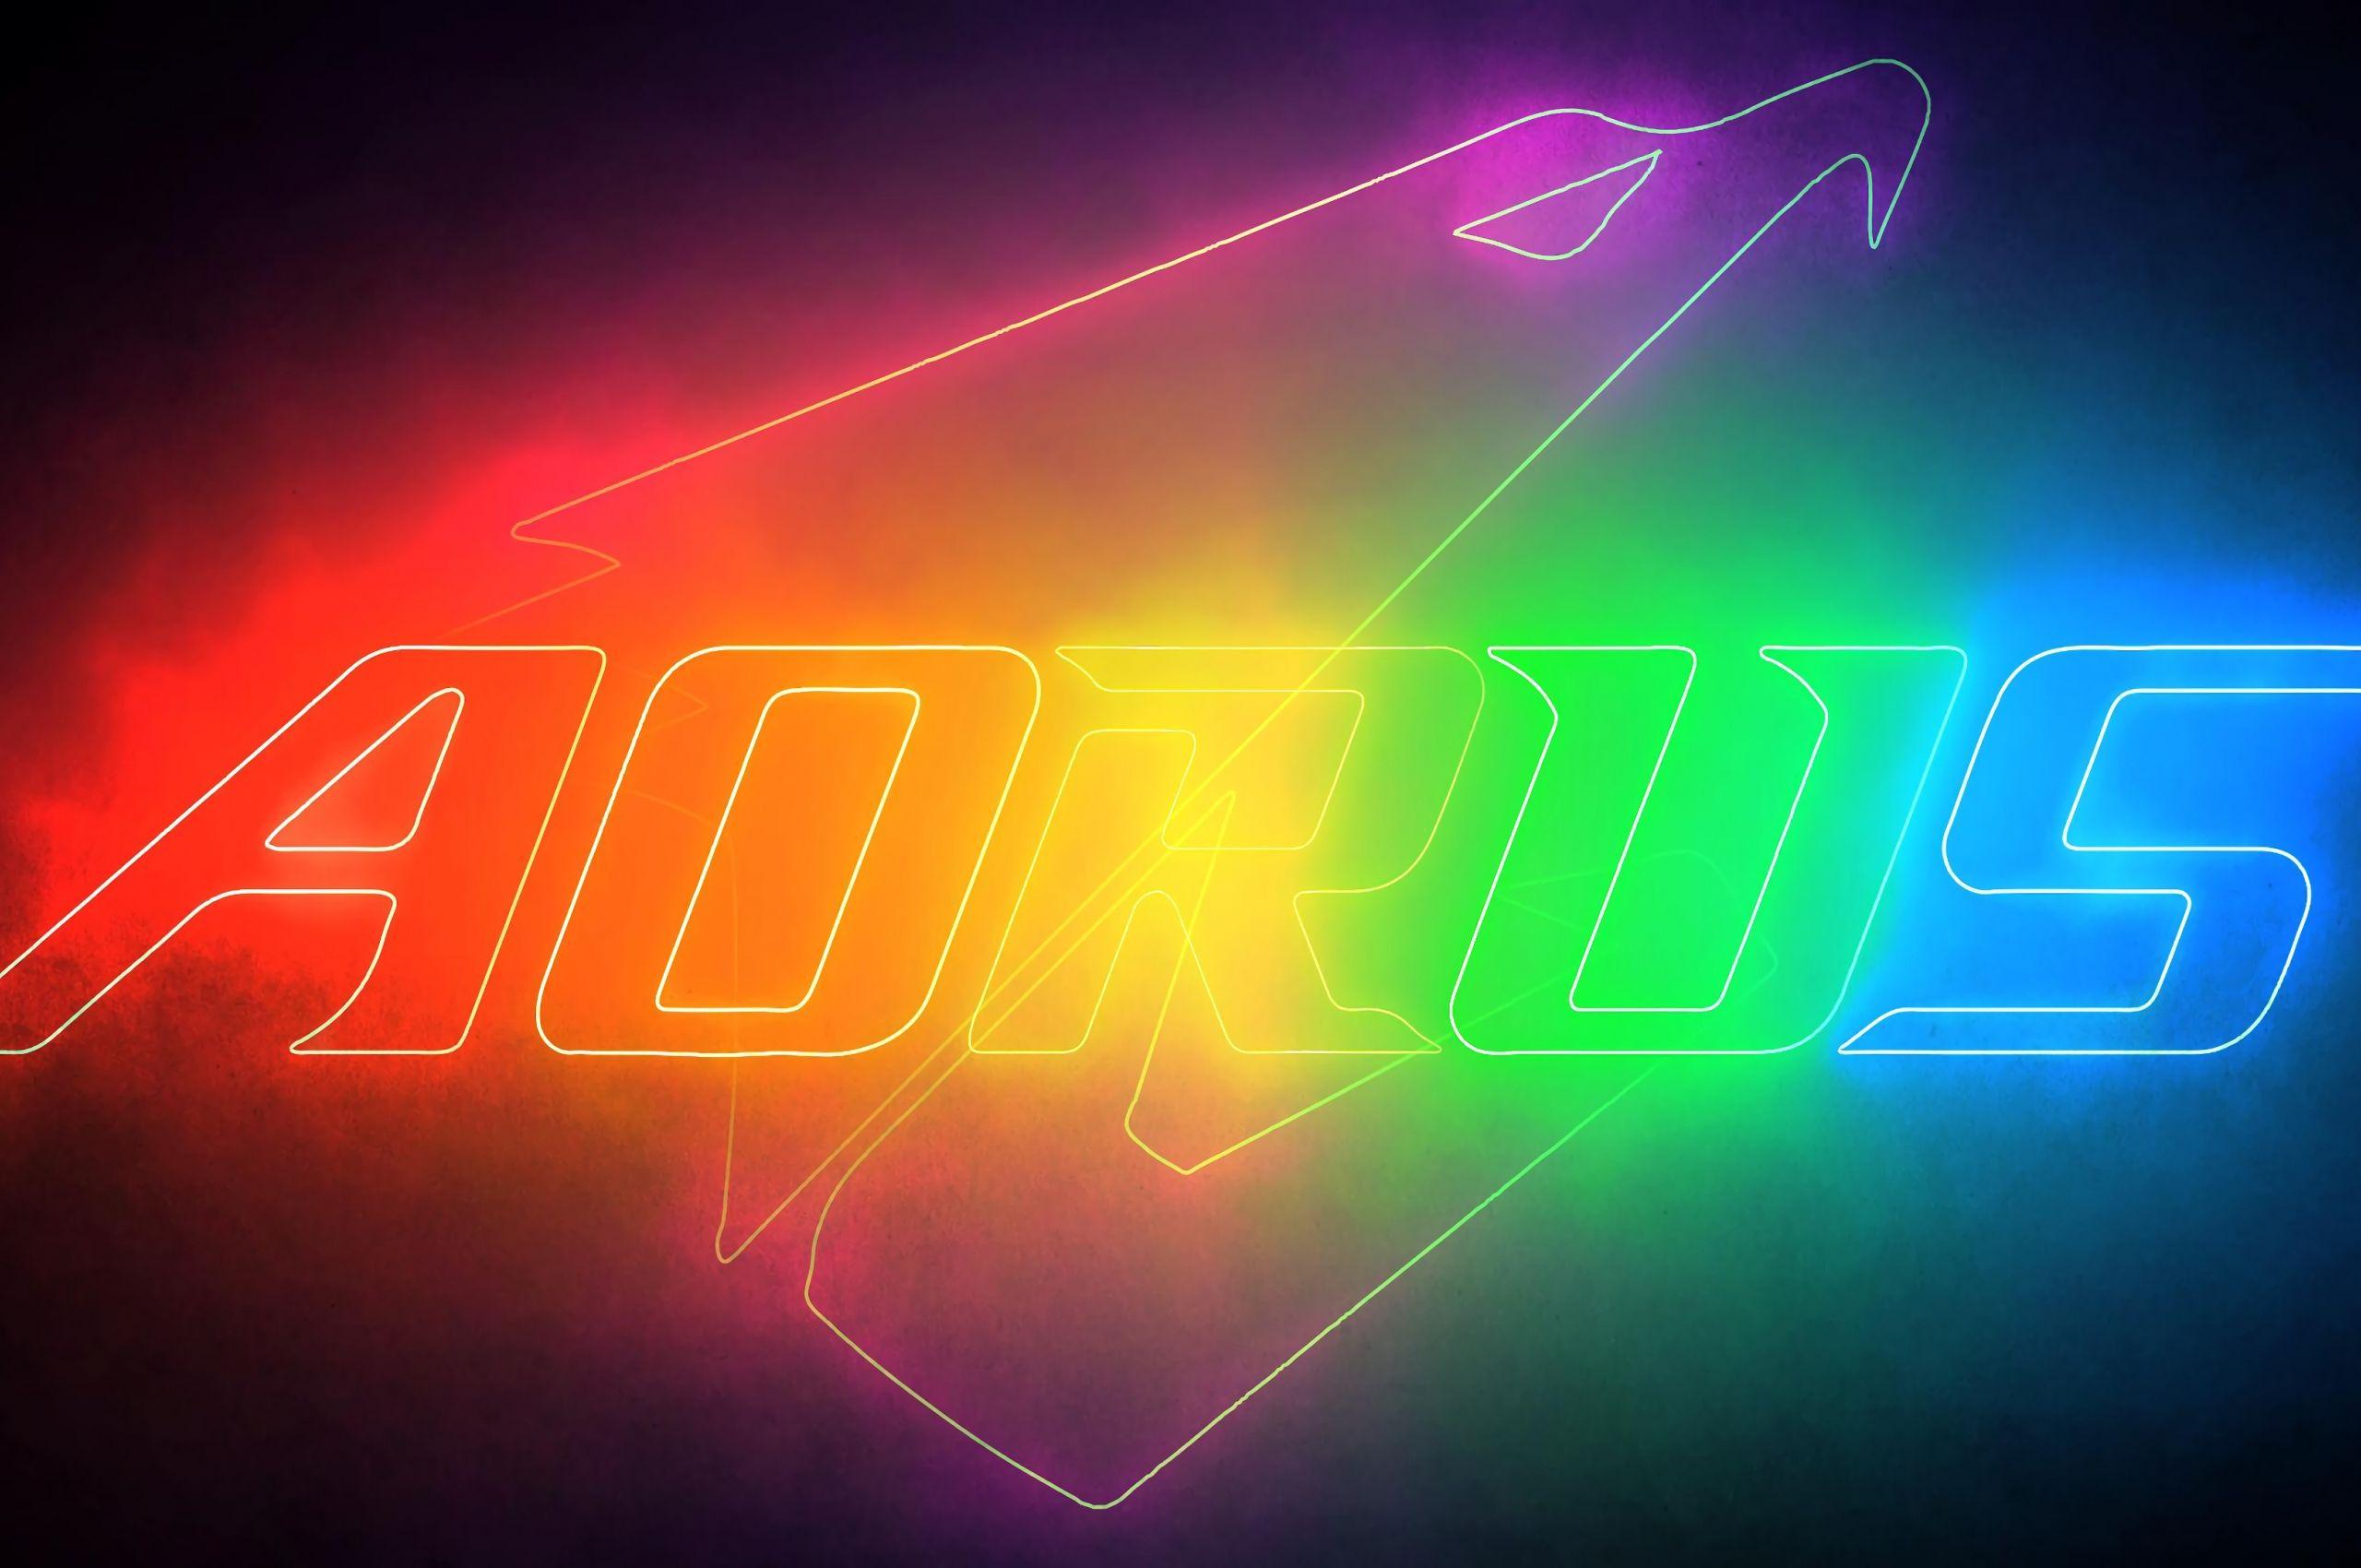 Rgb Wallpaper K Gif Aorus Enthusiasts Choice For Pc Gaming And My Xxx